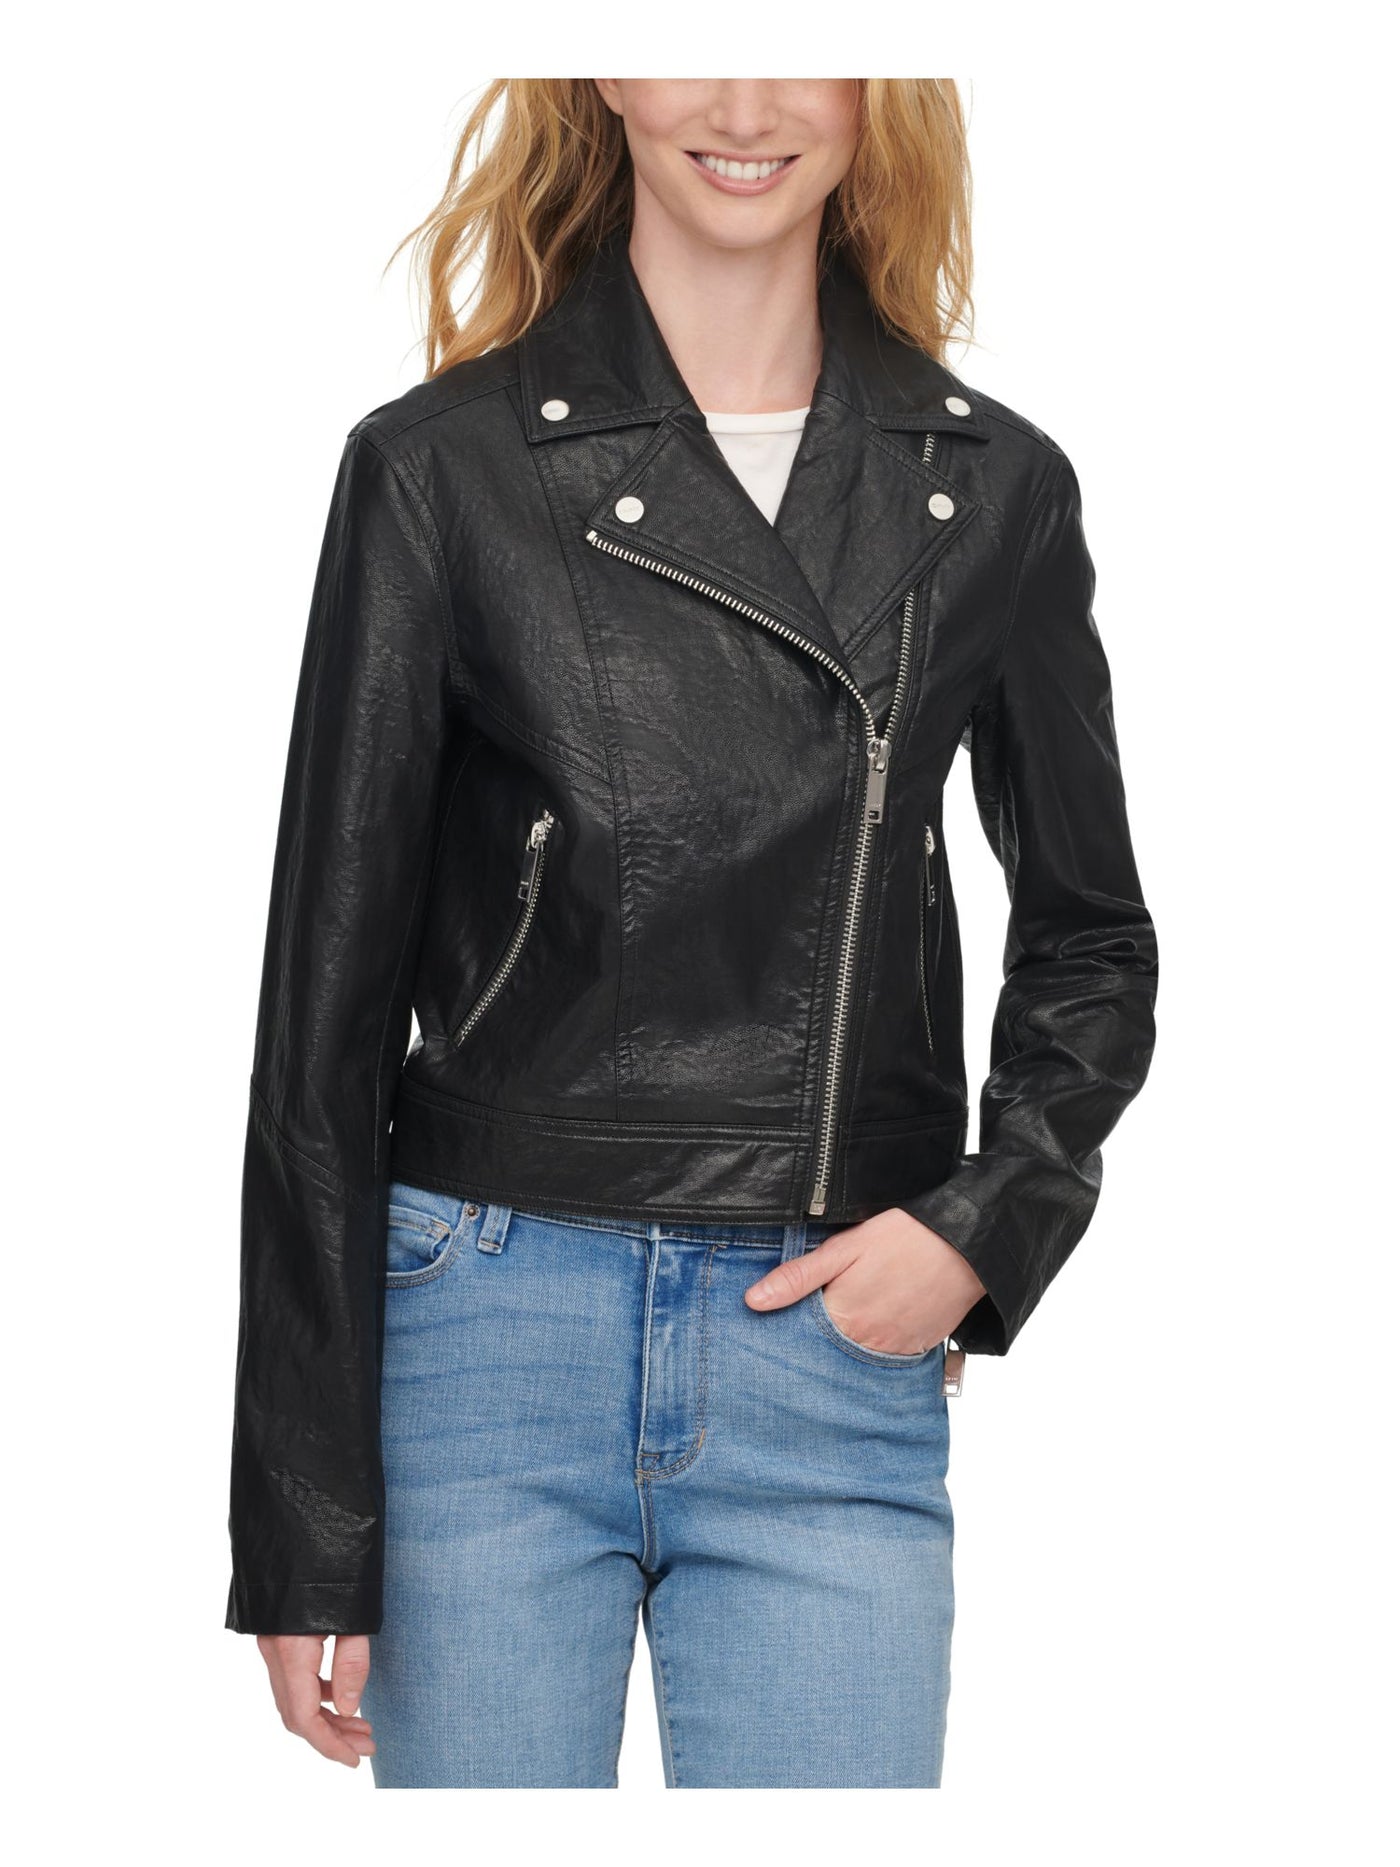 DKNY Womens Black Pocketed Faux Leather Motorcycle Jacket XL